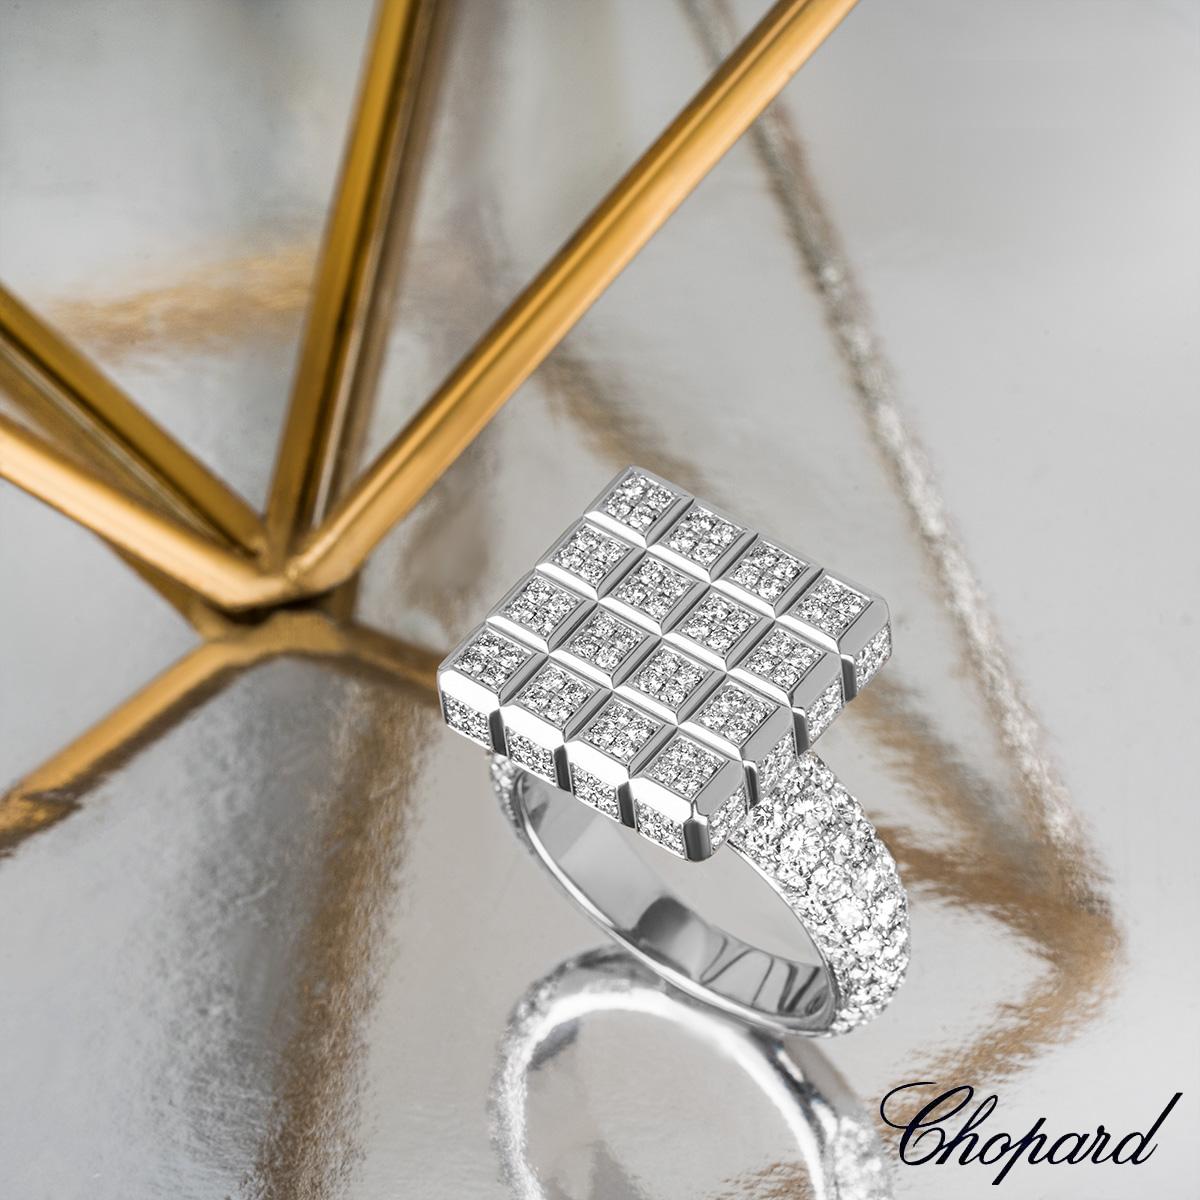 Round Cut Chopard 18k White Gold Diamond Set Ice Cube Ring B&P 825442-1109 For Sale